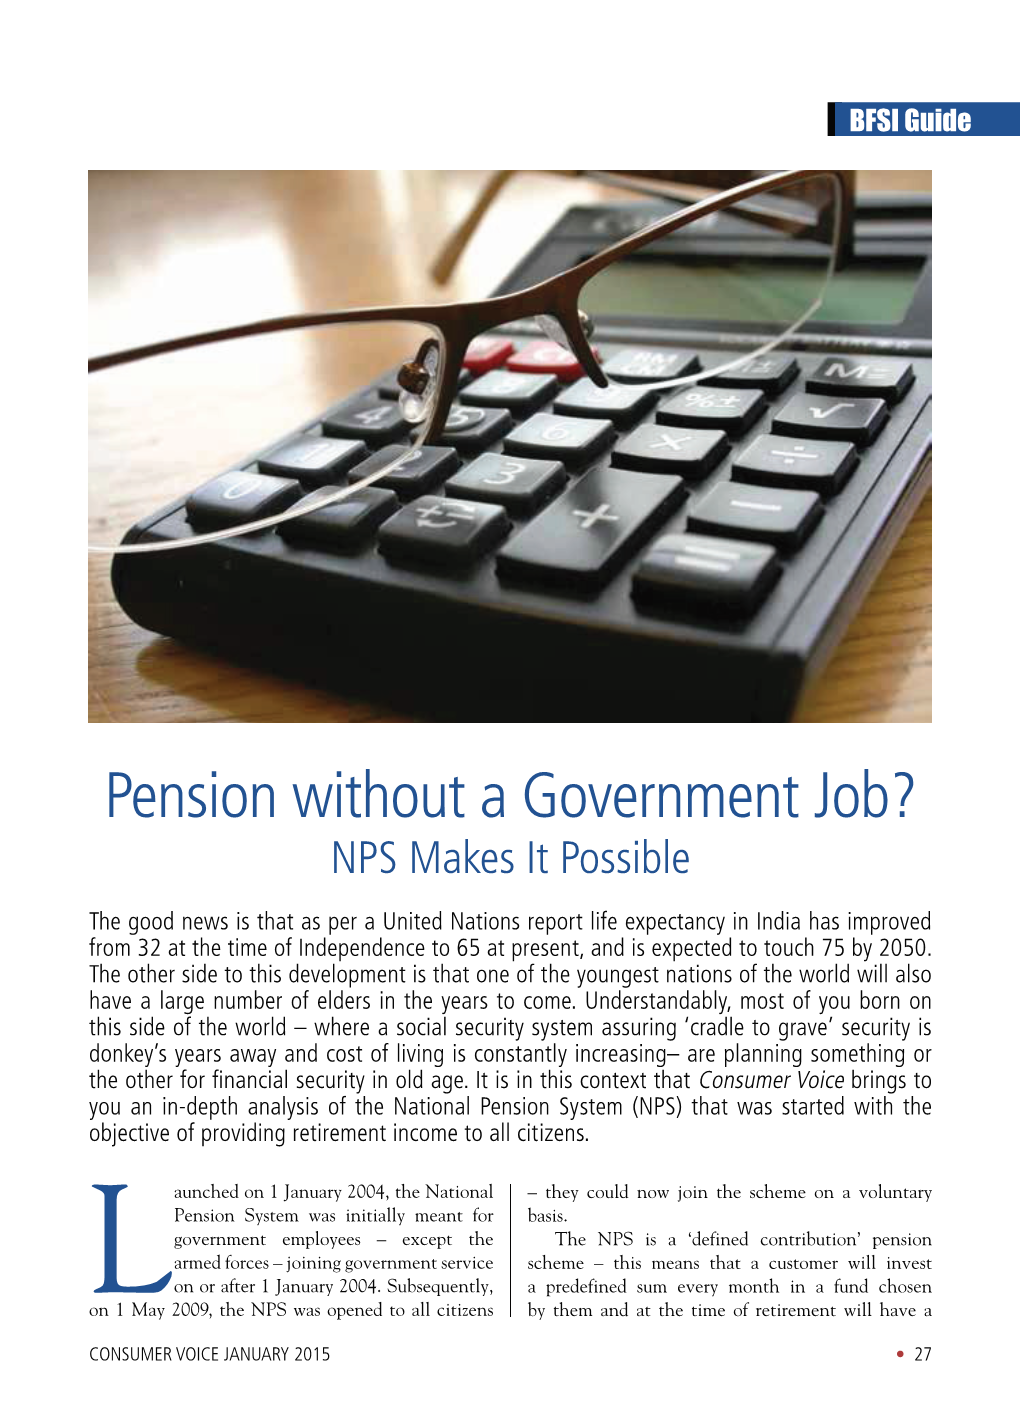 Pension Without a Government Job? NPS Makes It Possible